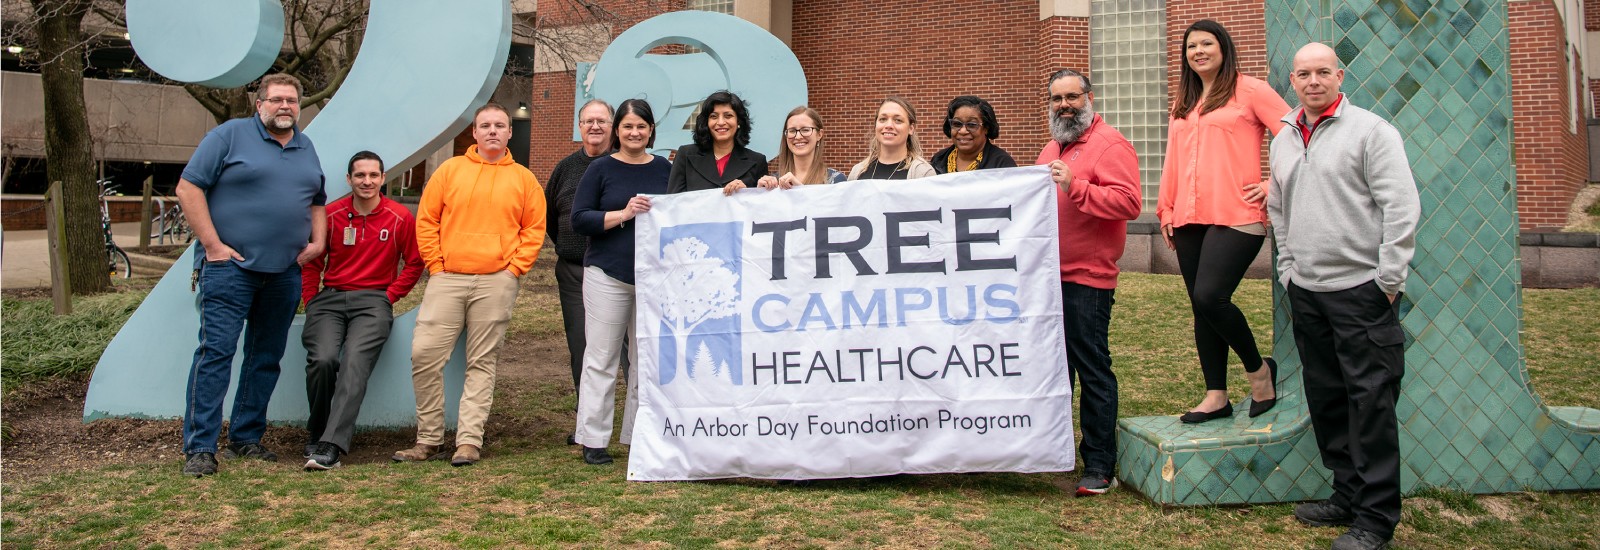 Wexner Medical Center recognized as Tree Campus Healthcare